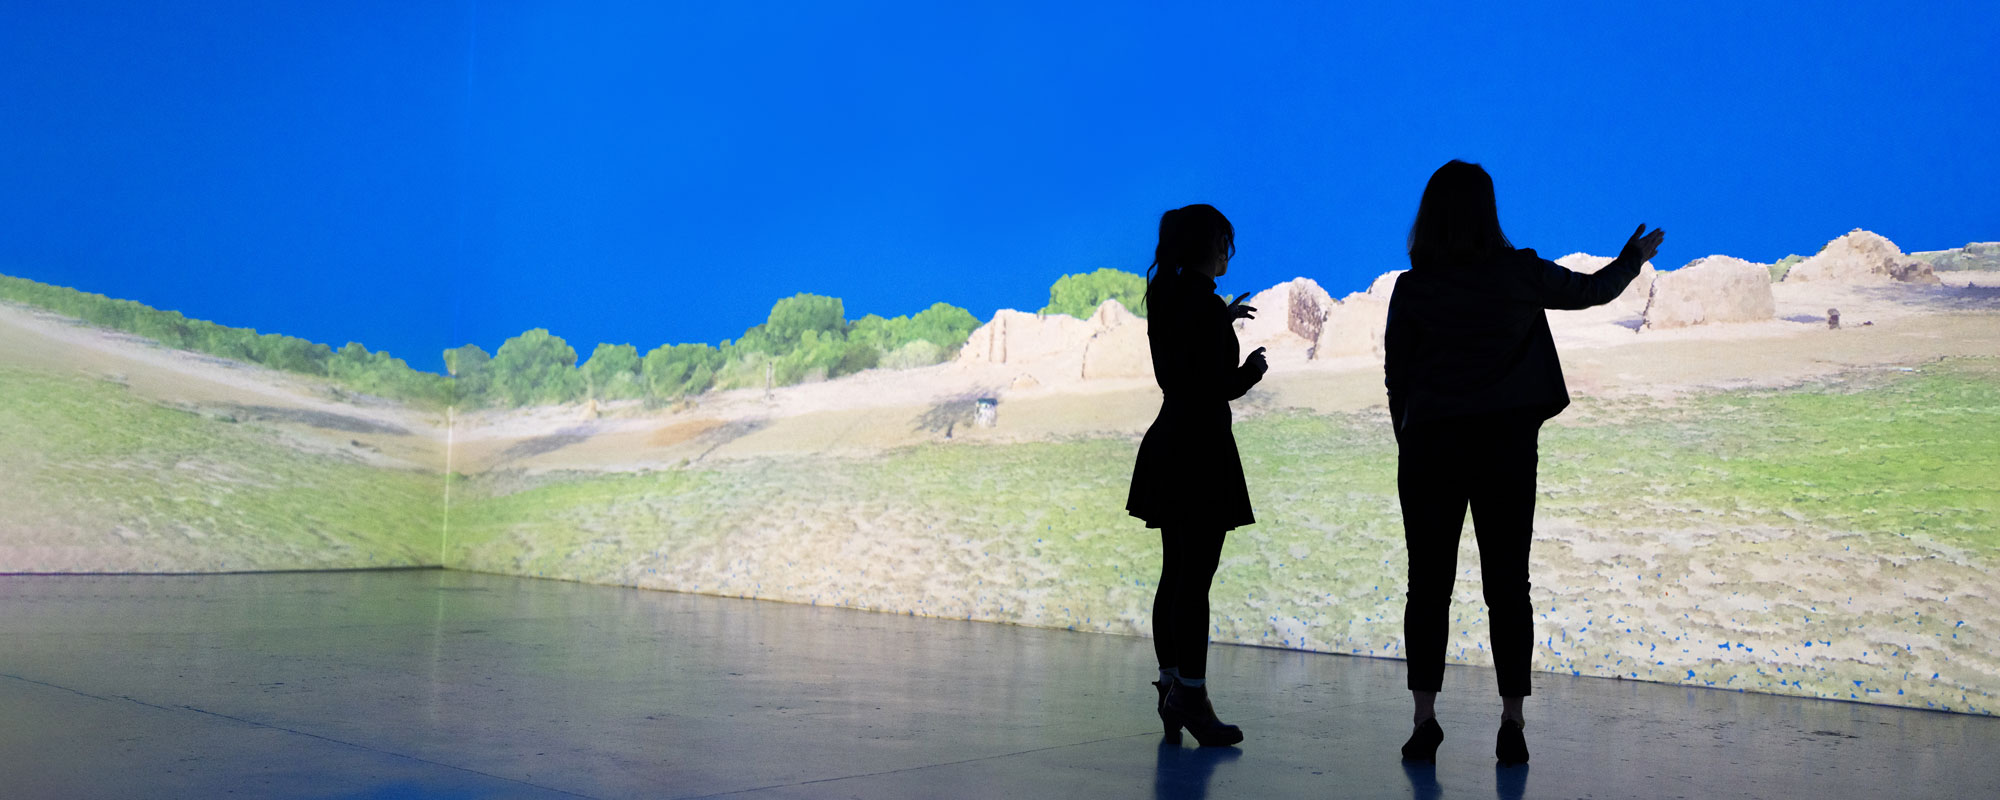 two women stand facing a digital screen that takes up entire wall and depicts a blue sky and green grass, with their backs to the camera